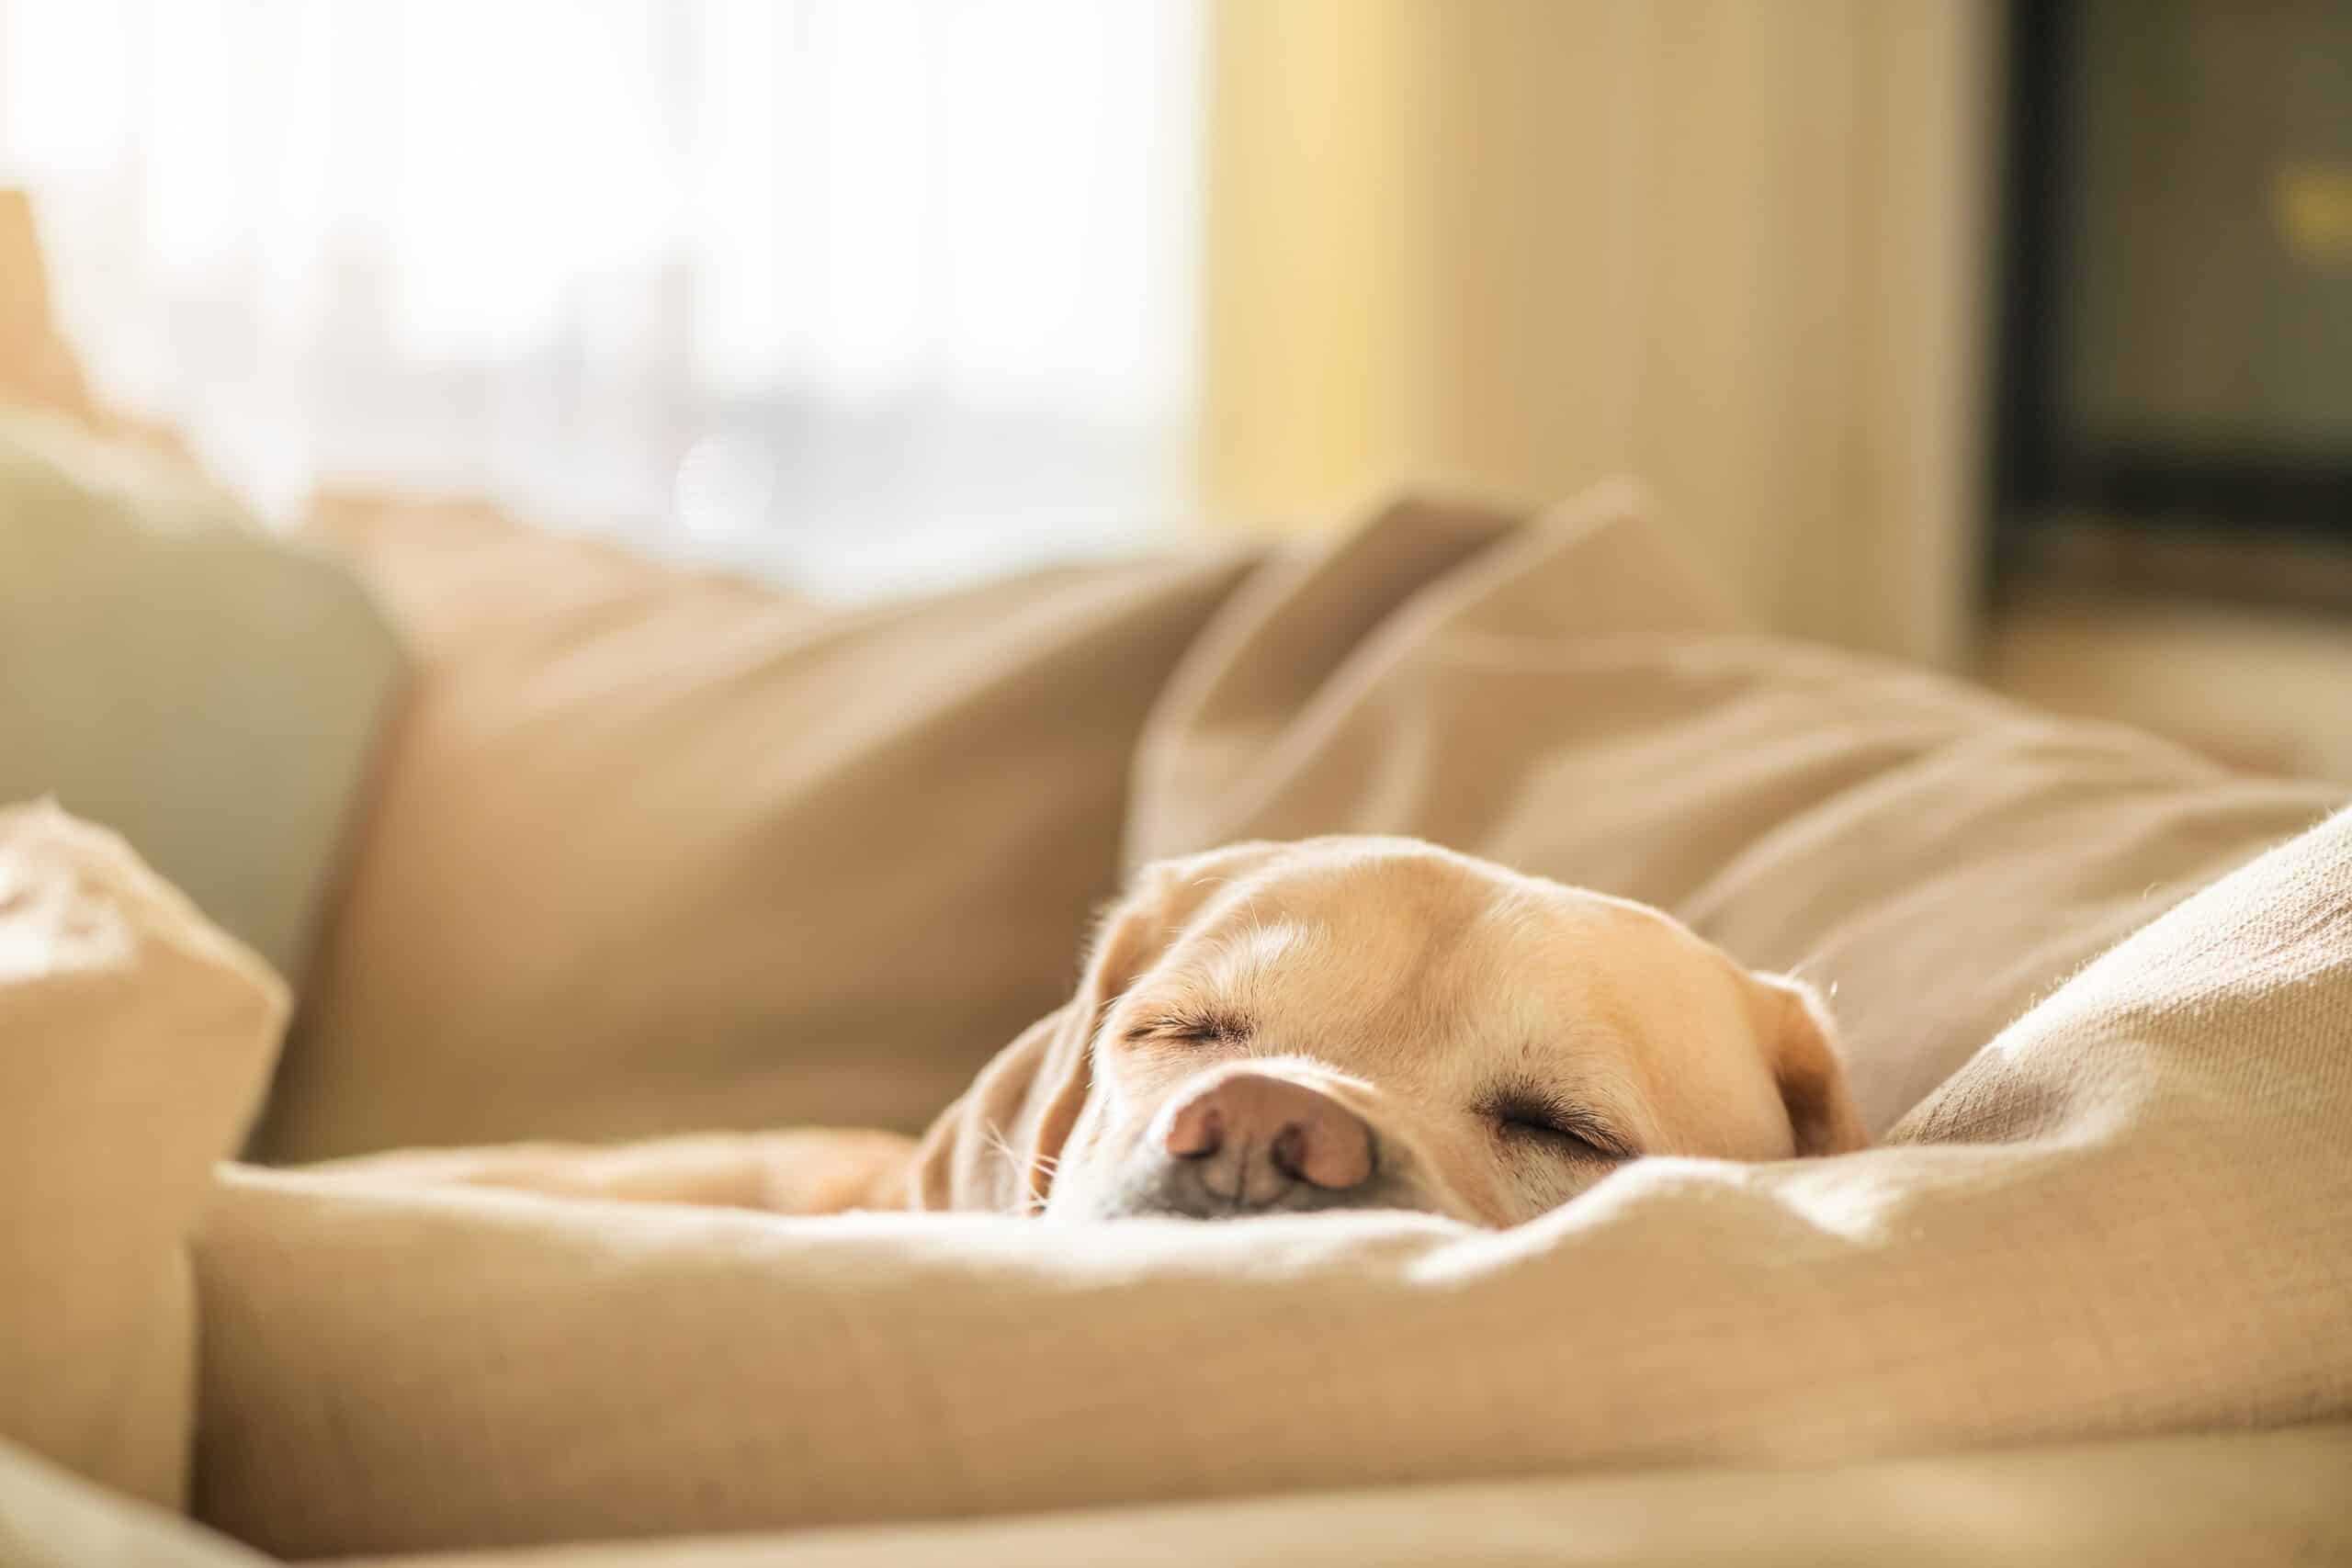 Dogs who sleep alone are anti-social